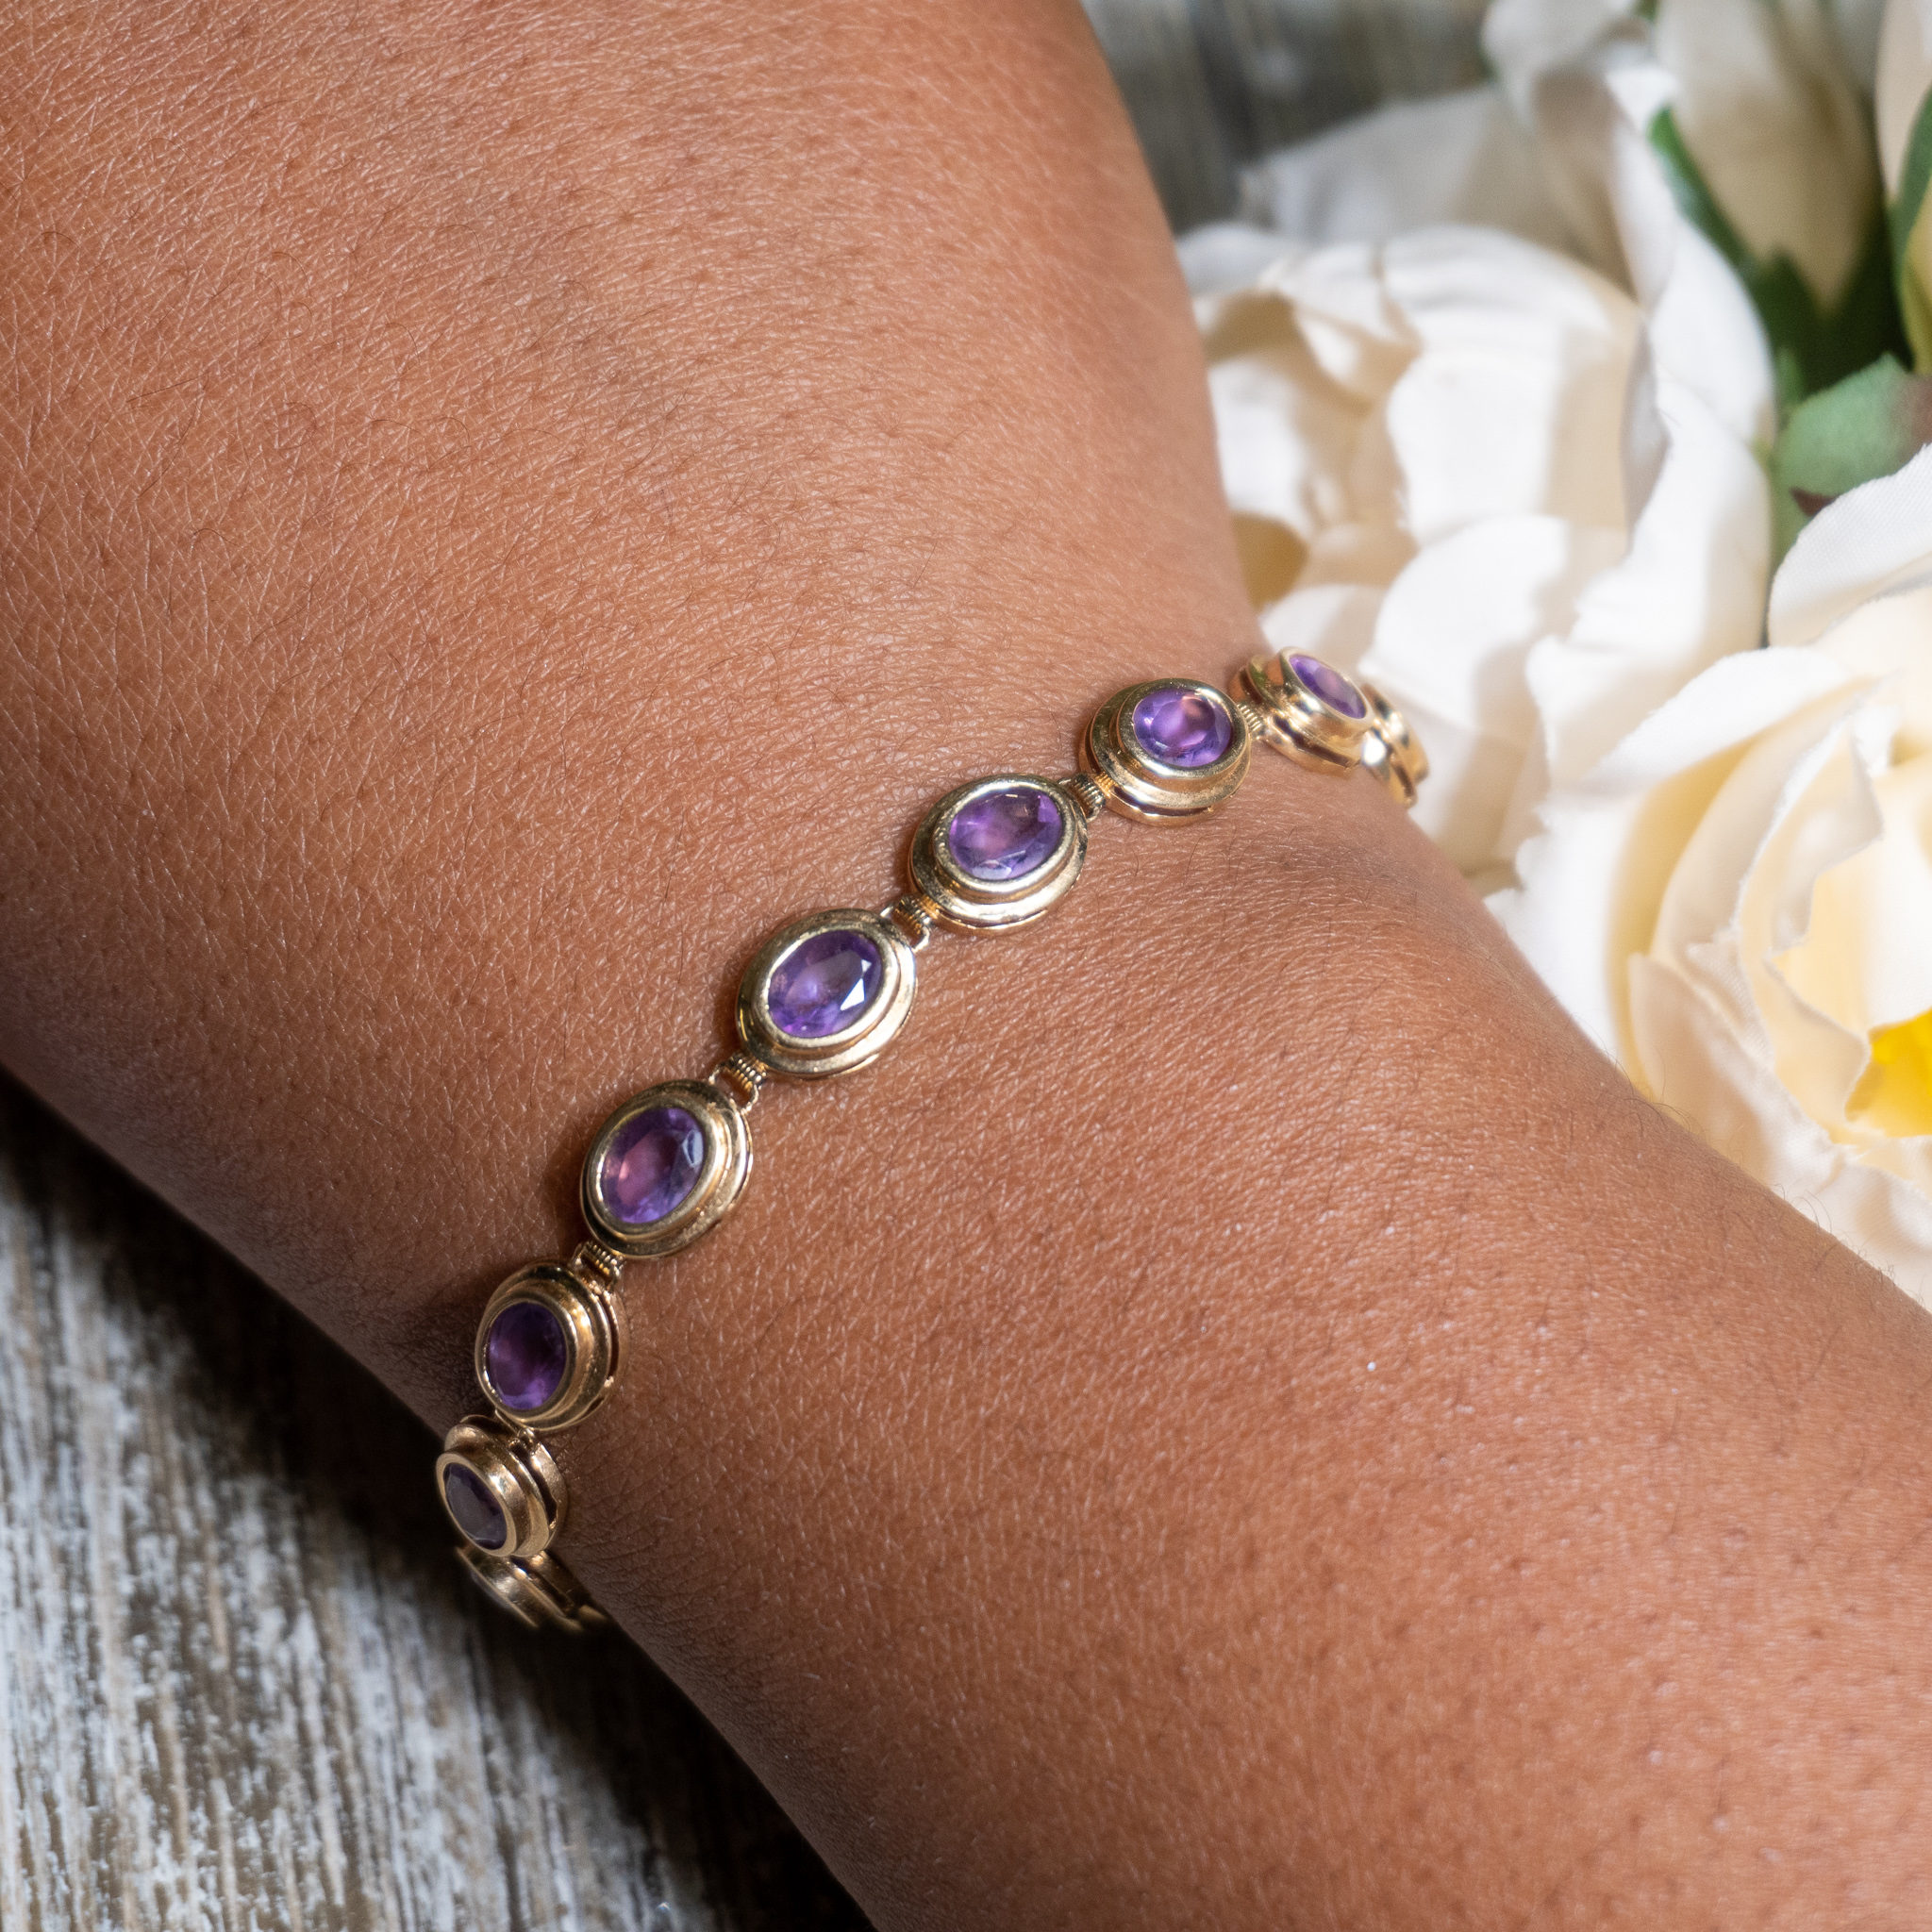 Amethyst in 14K Gold Bracelet - The Crystal Council